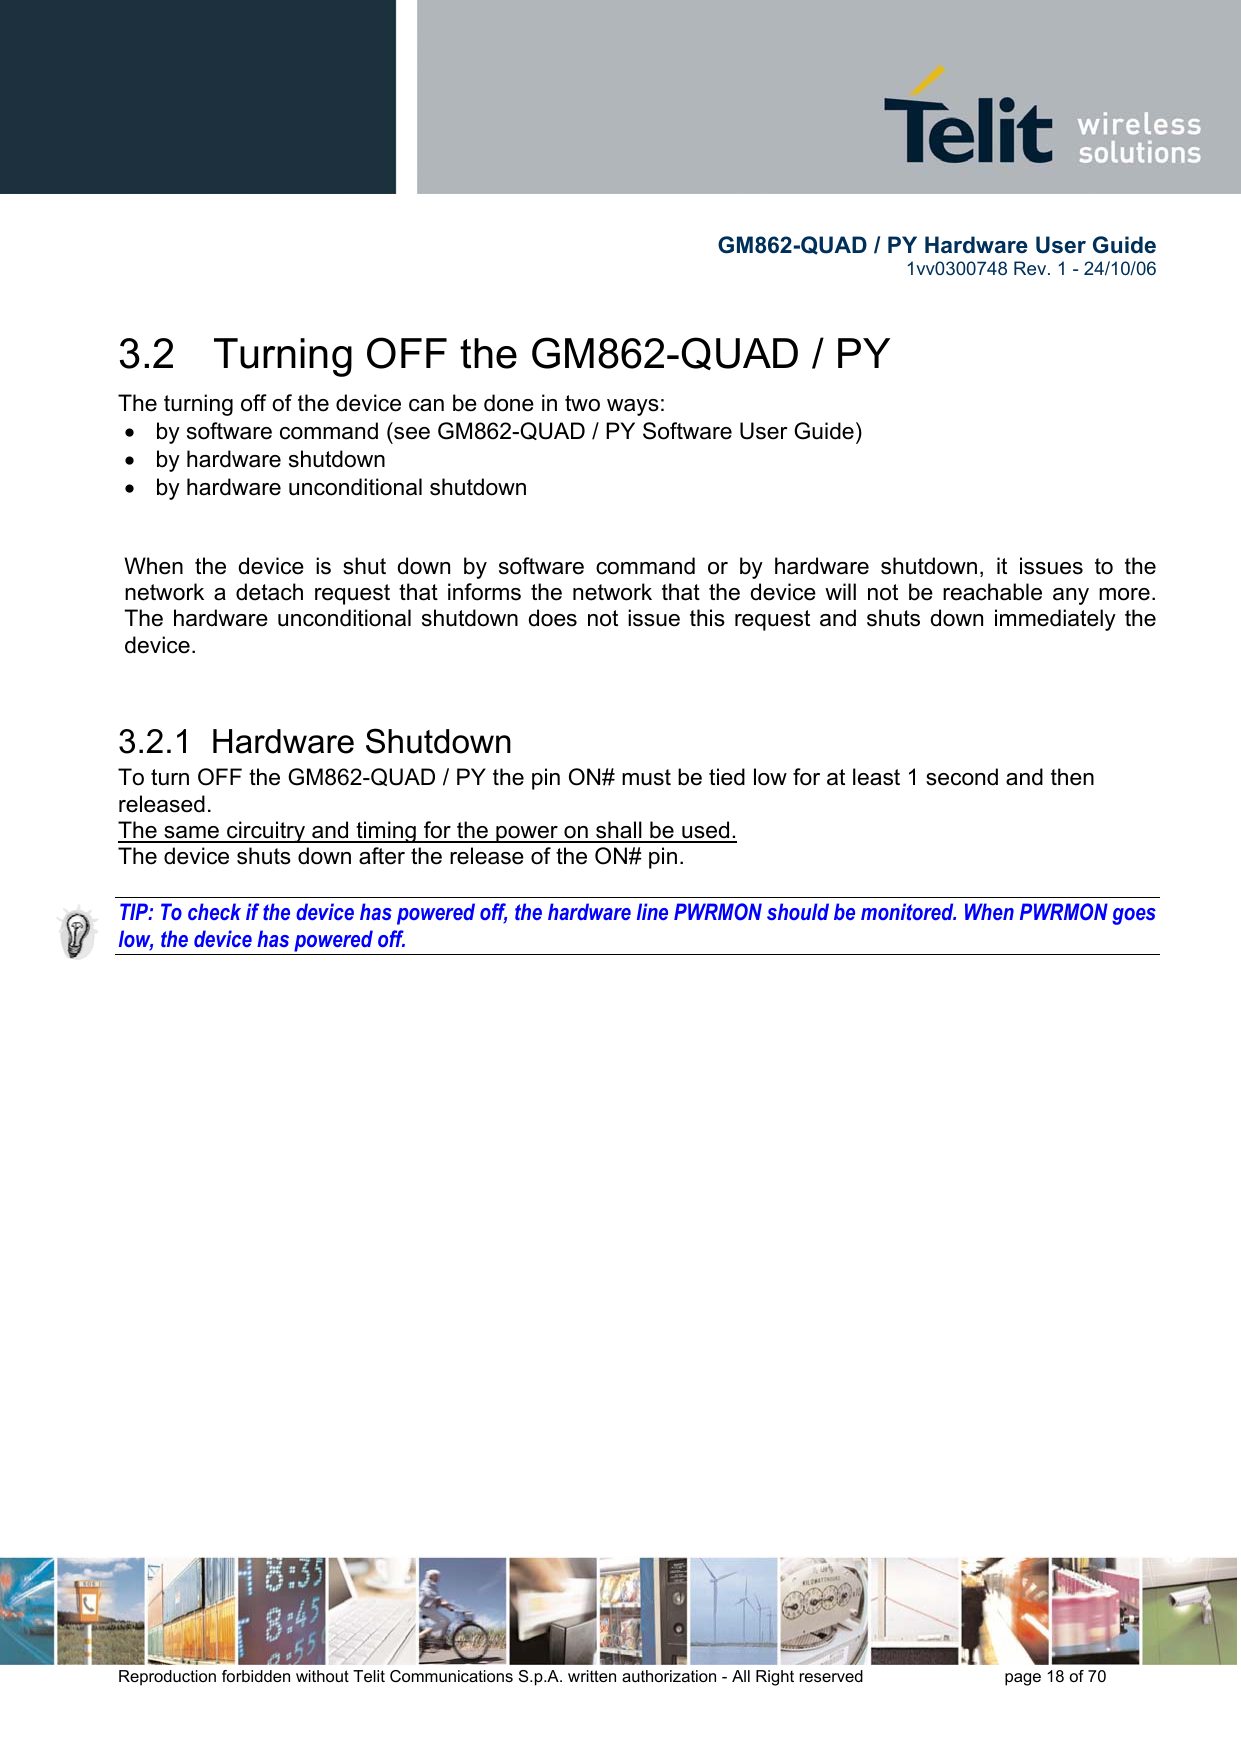        GM862-QUAD / PY Hardware User Guide   1vv0300748 Rev. 1 - 24/10/06    Reproduction forbidden without Telit Communications S.p.A. written authorization - All Right reserved    page 18 of 70  3.2   Turning OFF the GM862-QUAD / PY The turning off of the device can be done in two ways: •  by software command (see GM862-QUAD / PY Software User Guide) •  by hardware shutdown •  by hardware unconditional shutdown   When the device is shut down by software command or by hardware shutdown, it issues to the network a detach request that informs the network that the device will not be reachable any more. The hardware unconditional shutdown does not issue this request and shuts down immediately the device.  3.2.1  Hardware Shutdown To turn OFF the GM862-QUAD / PY the pin ON# must be tied low for at least 1 second and then released. The same circuitry and timing for the power on shall be used. The device shuts down after the release of the ON# pin.  TIP: To check if the device has powered off, the hardware line PWRMON should be monitored. When PWRMON goes low, the device has powered off. 